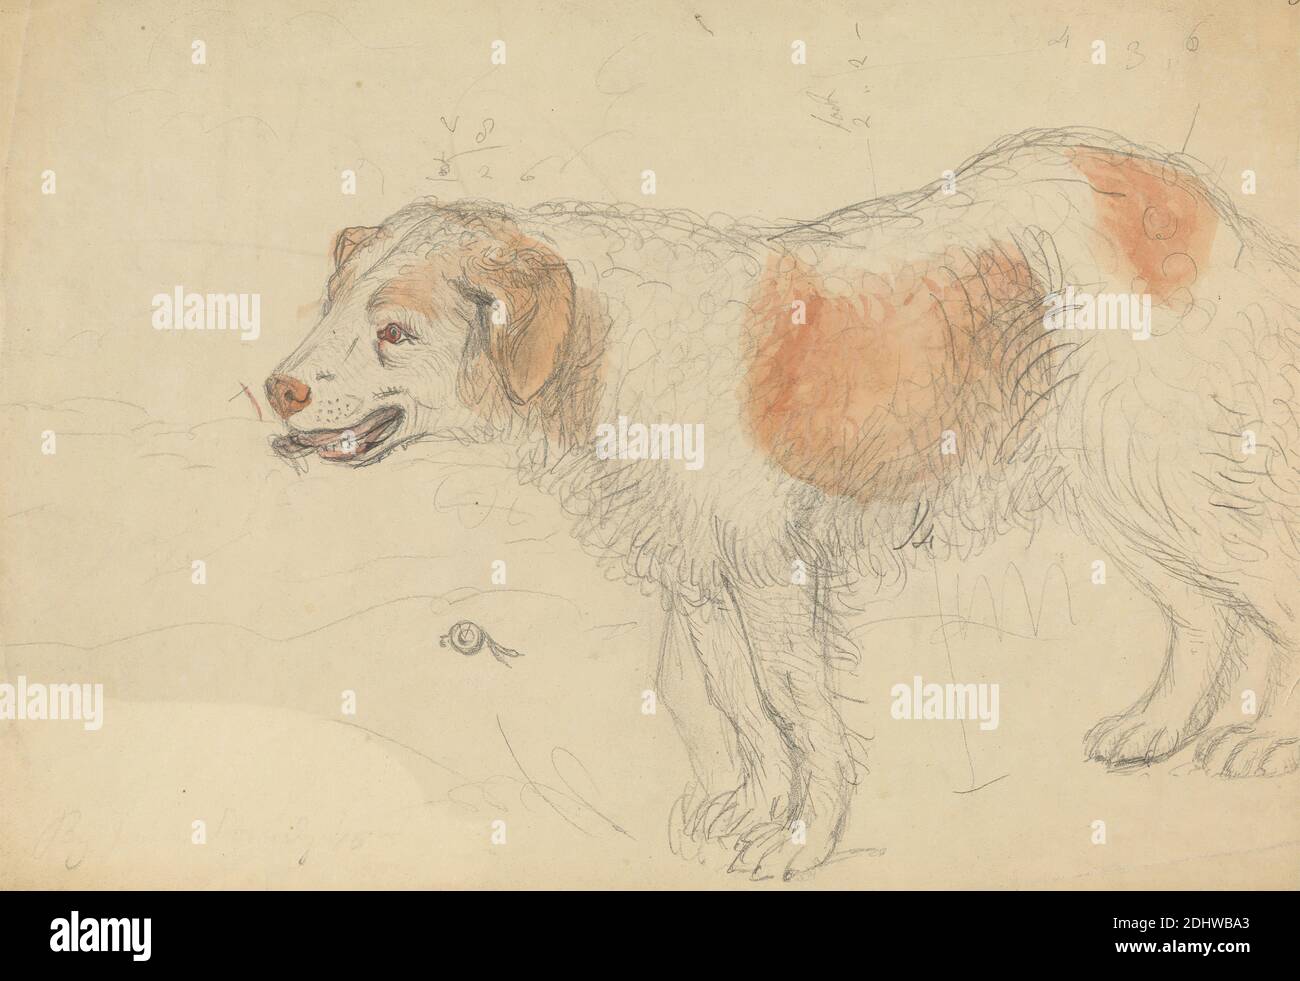 A Dog, James Sowerby, 1756–1822, British, undated, Watercolor over graphite on moderately thick, slightly textured, cream wove paper, Sheet: 8 1/4 × 11 3/4 inches (21 × 29.8 cm), animal art, dog (animal), dogs, coyotes, wolves, jackals, and dingos Stock Photo